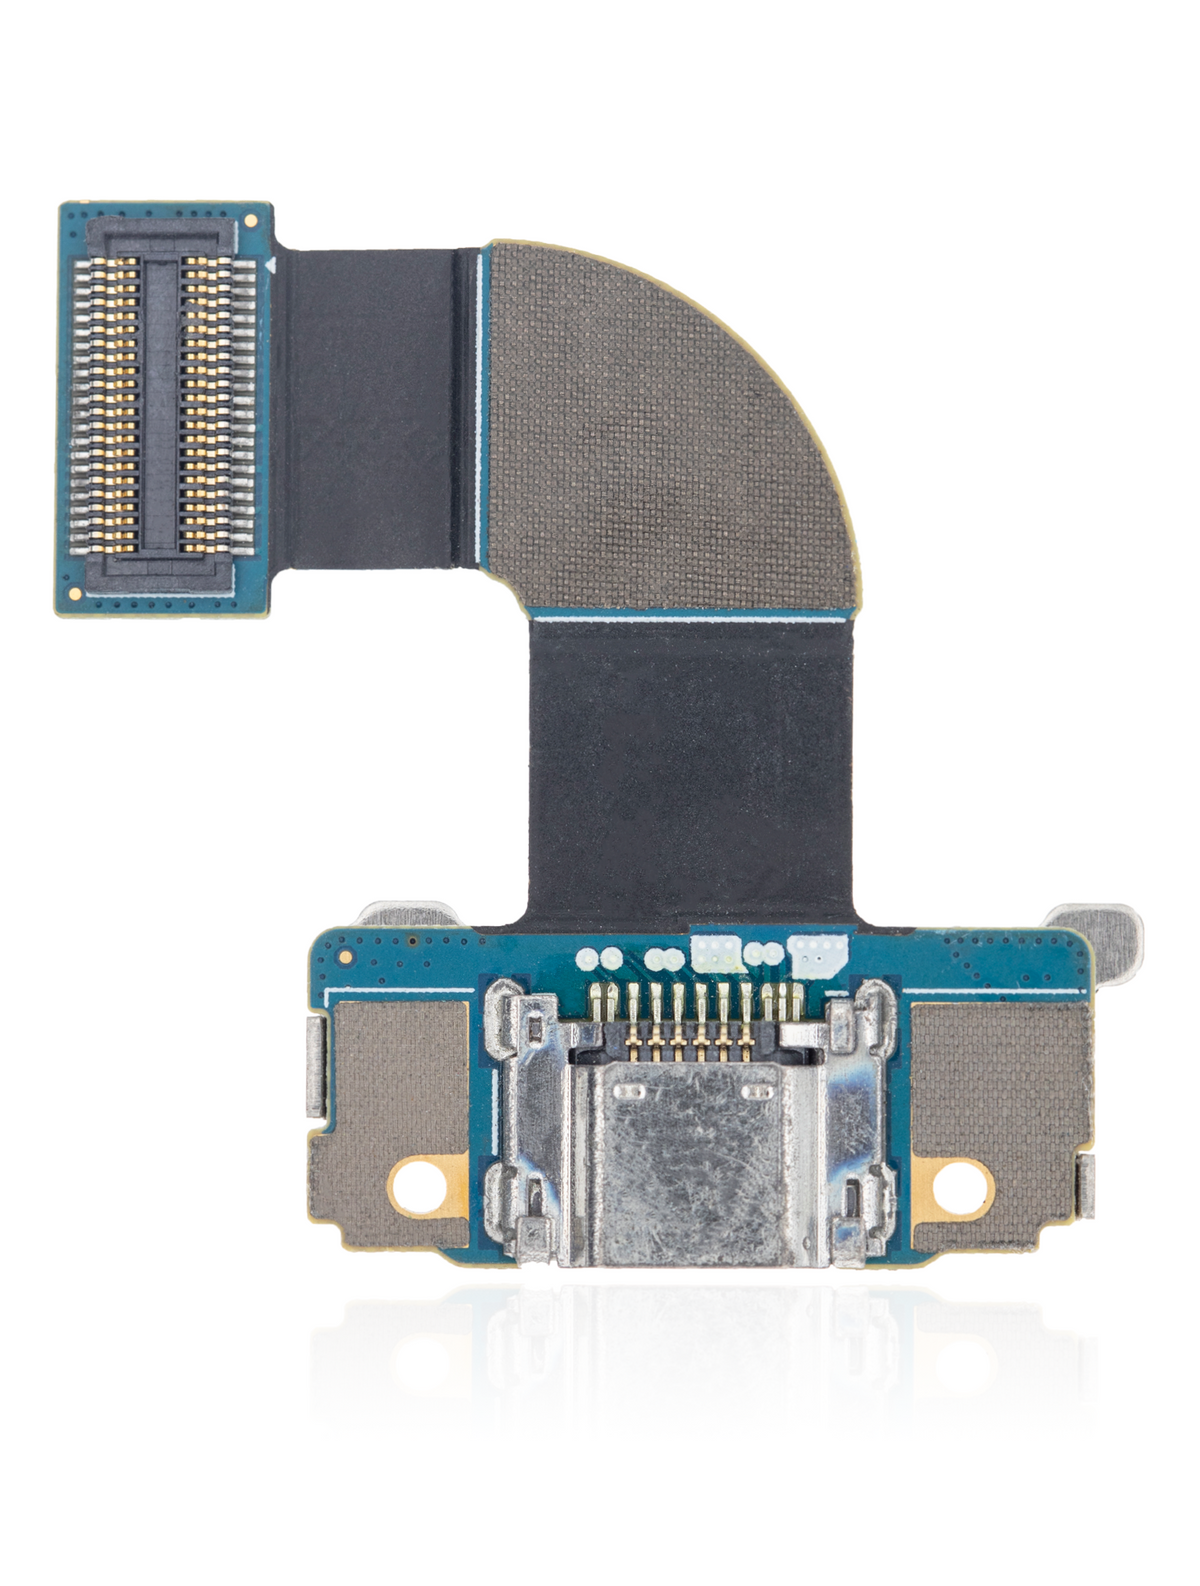 New Charging Port Flex Cable Compatible For Samsung Galaxy Tab Pro 8.4" (T320 / T321 / T325)